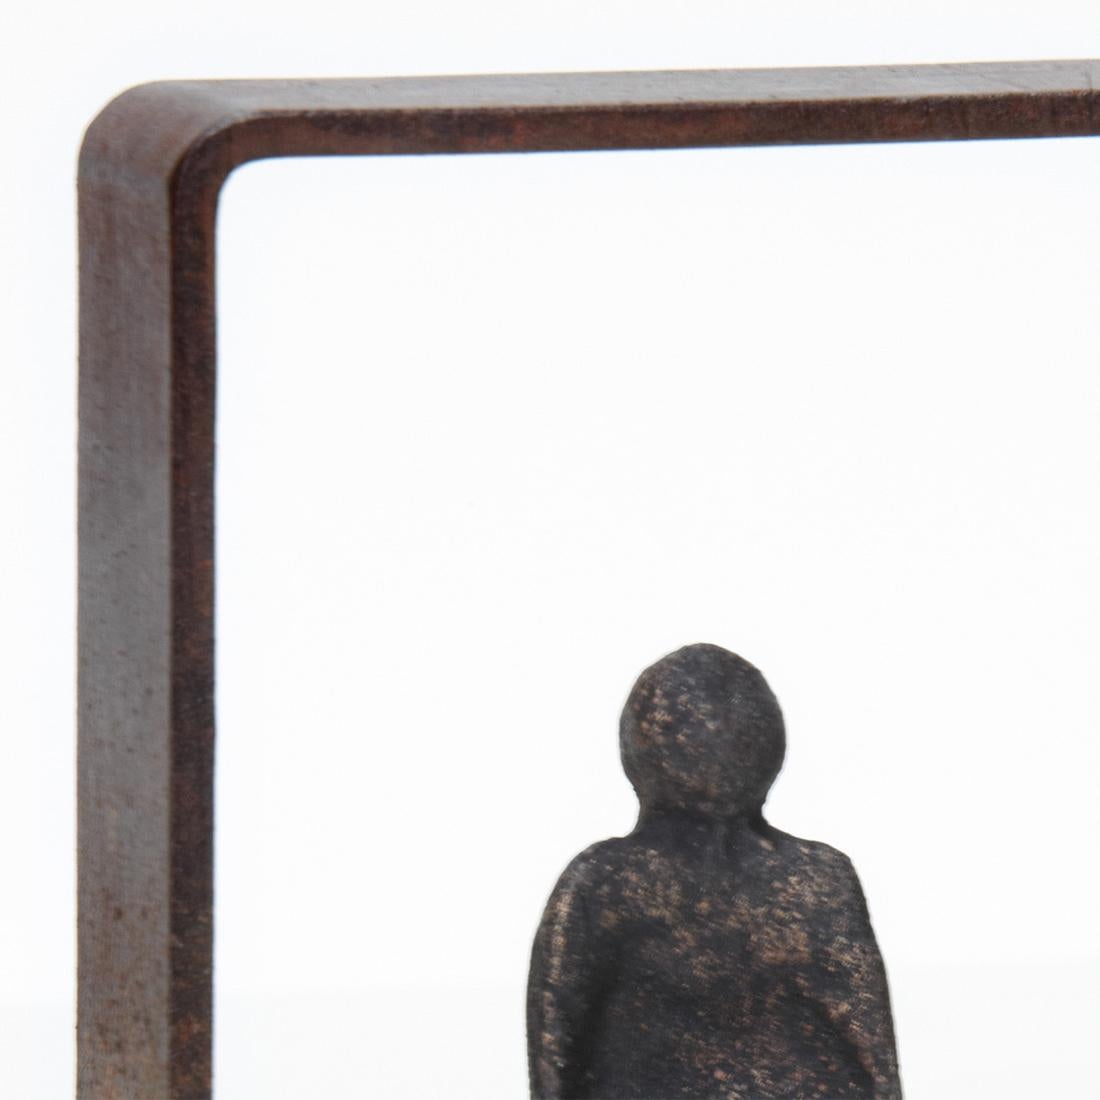 Sculpture threshold bronze with frame in
iron in oxydised finish and with body sculpture
in solid bronze in brown finish.